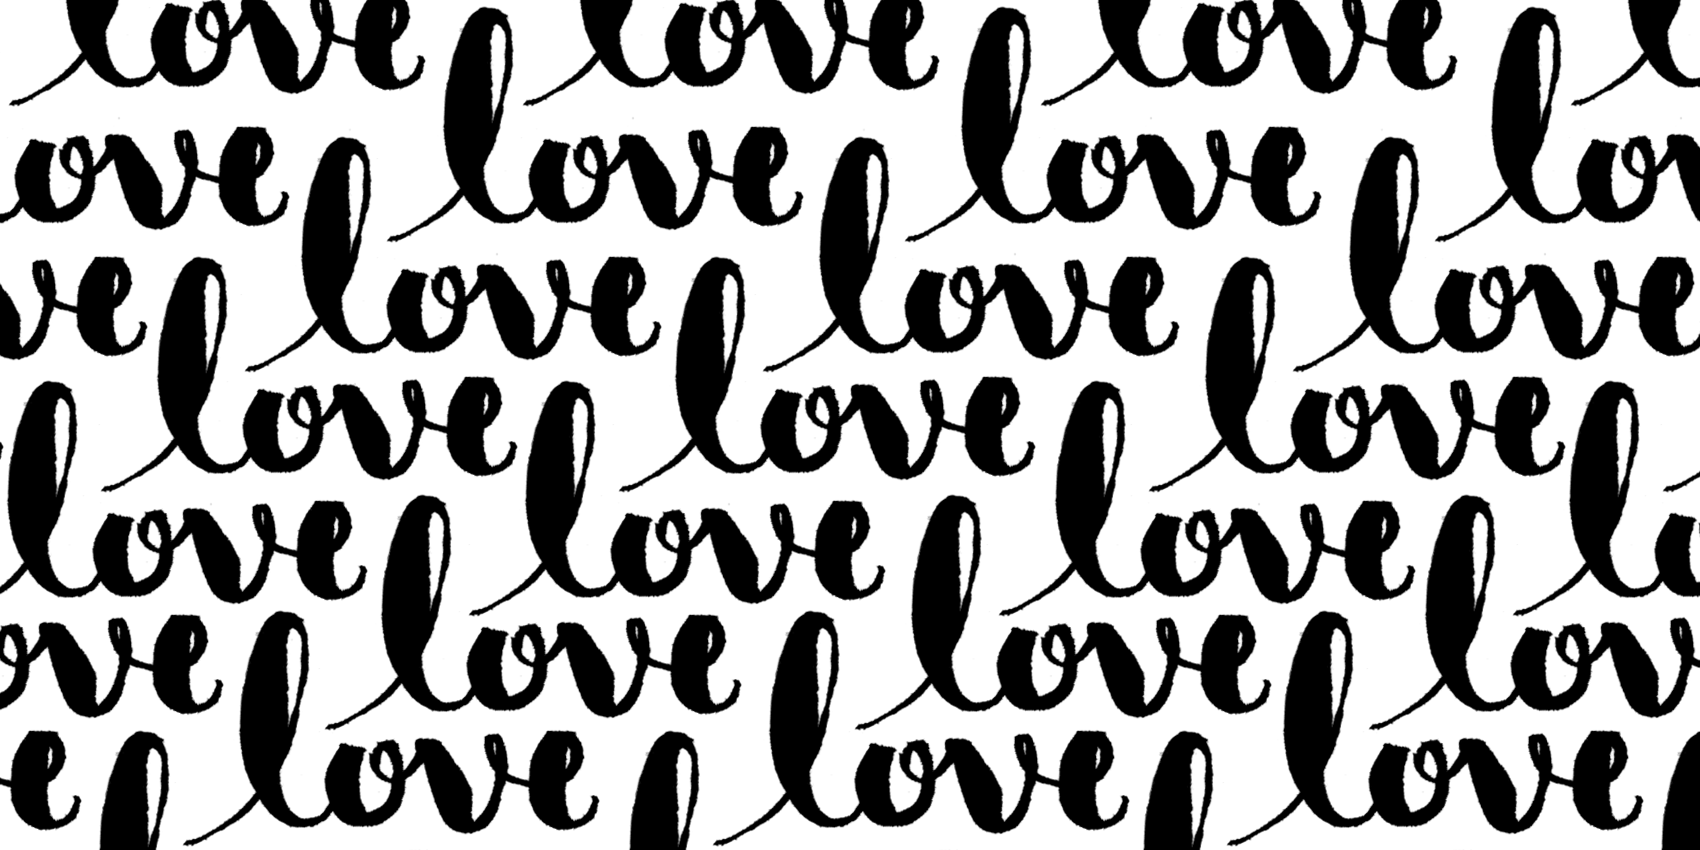 thick and thin brush script of the word love in a repeating pattern